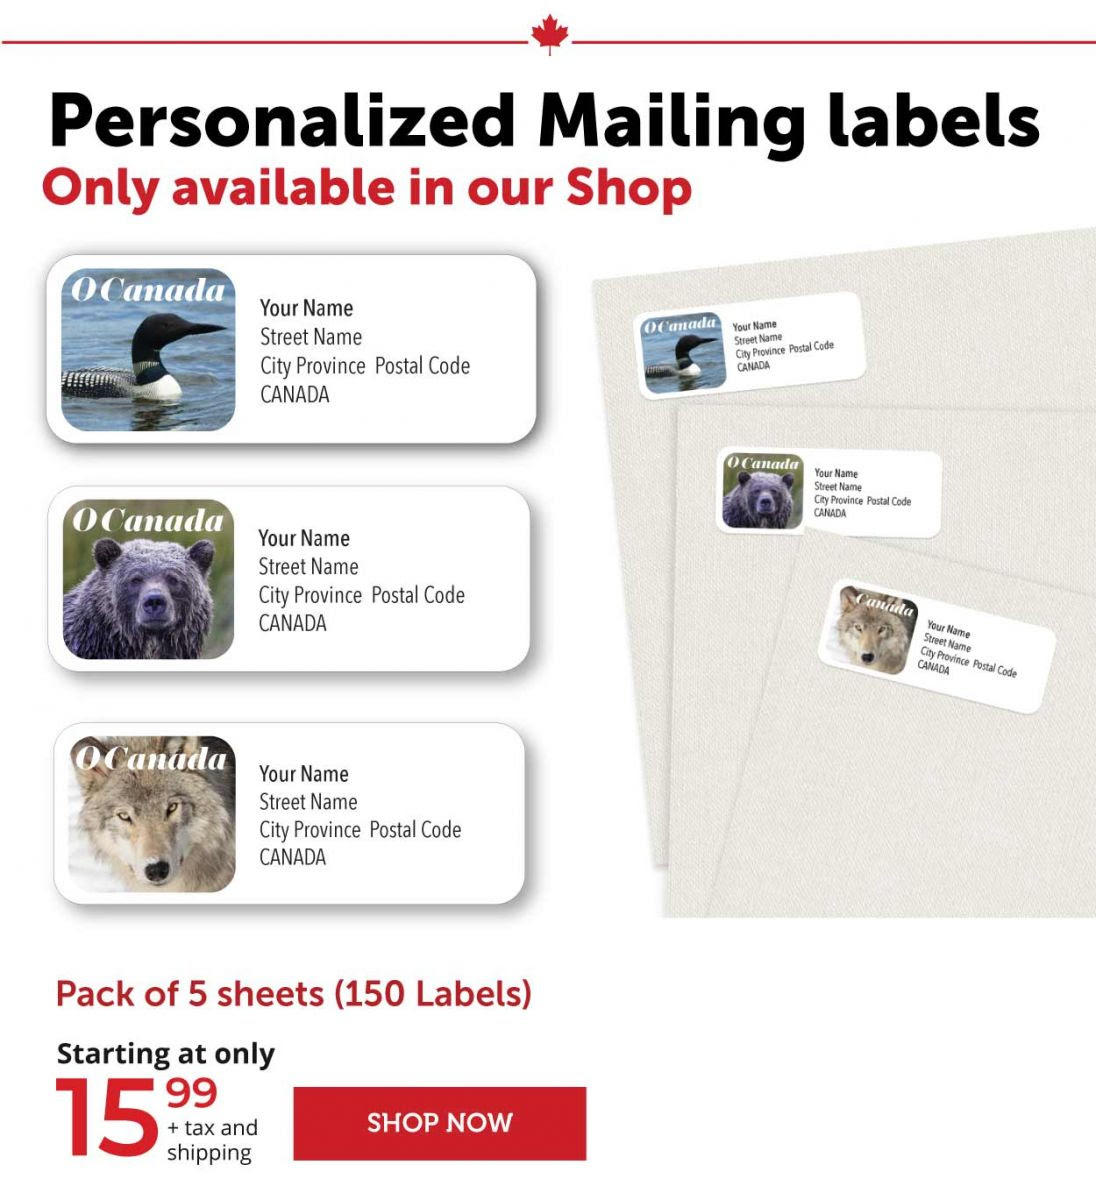 Personalized Mailing labels